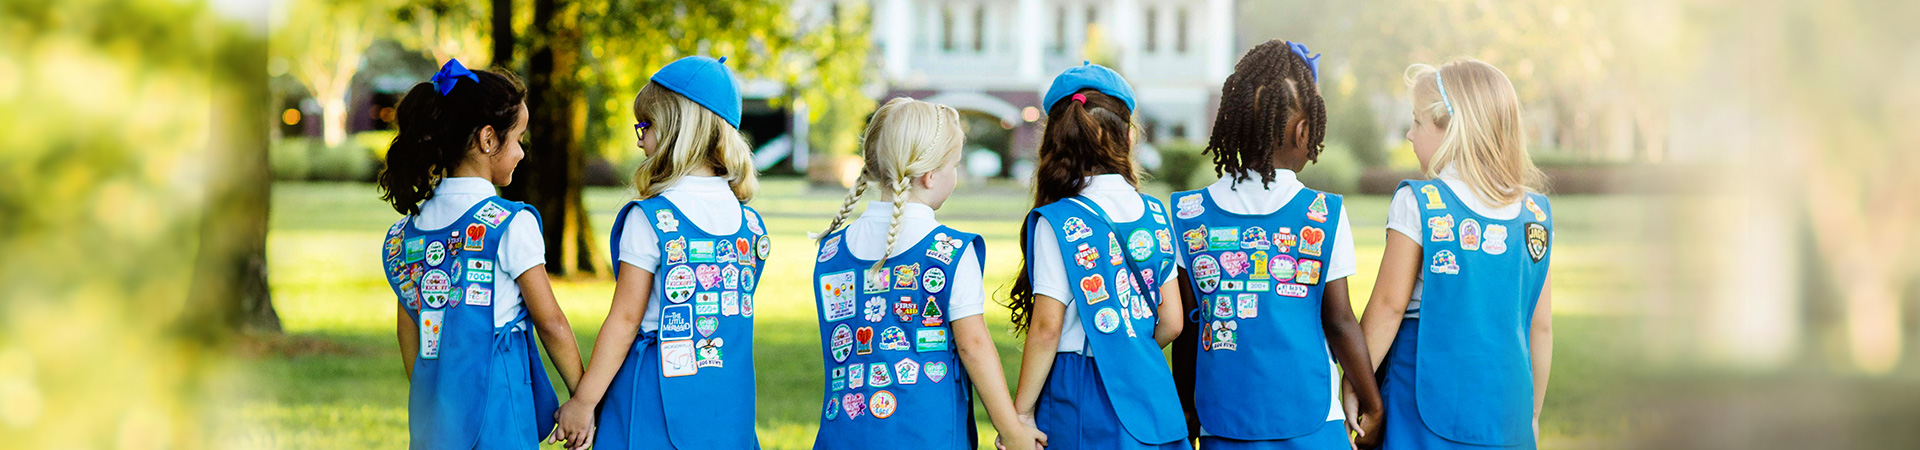  girls scouts walking away together holding hands 